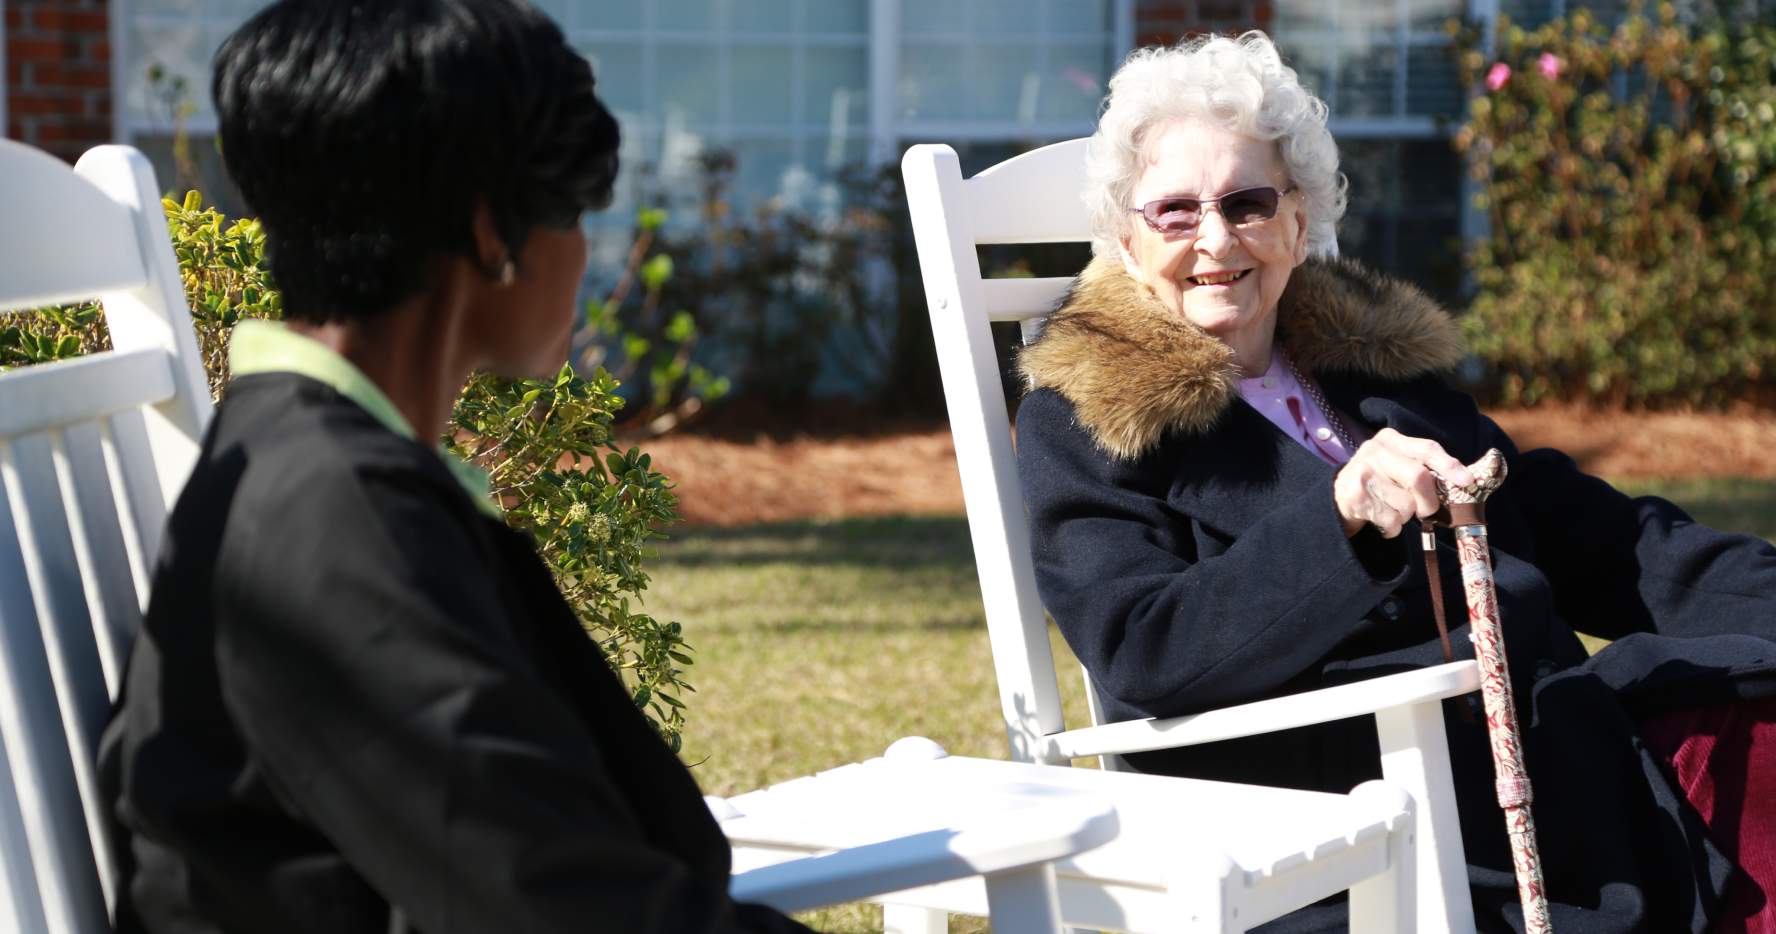 Ms. Schofield and her caregiver Cherise sit in rocking chairs outside and talk